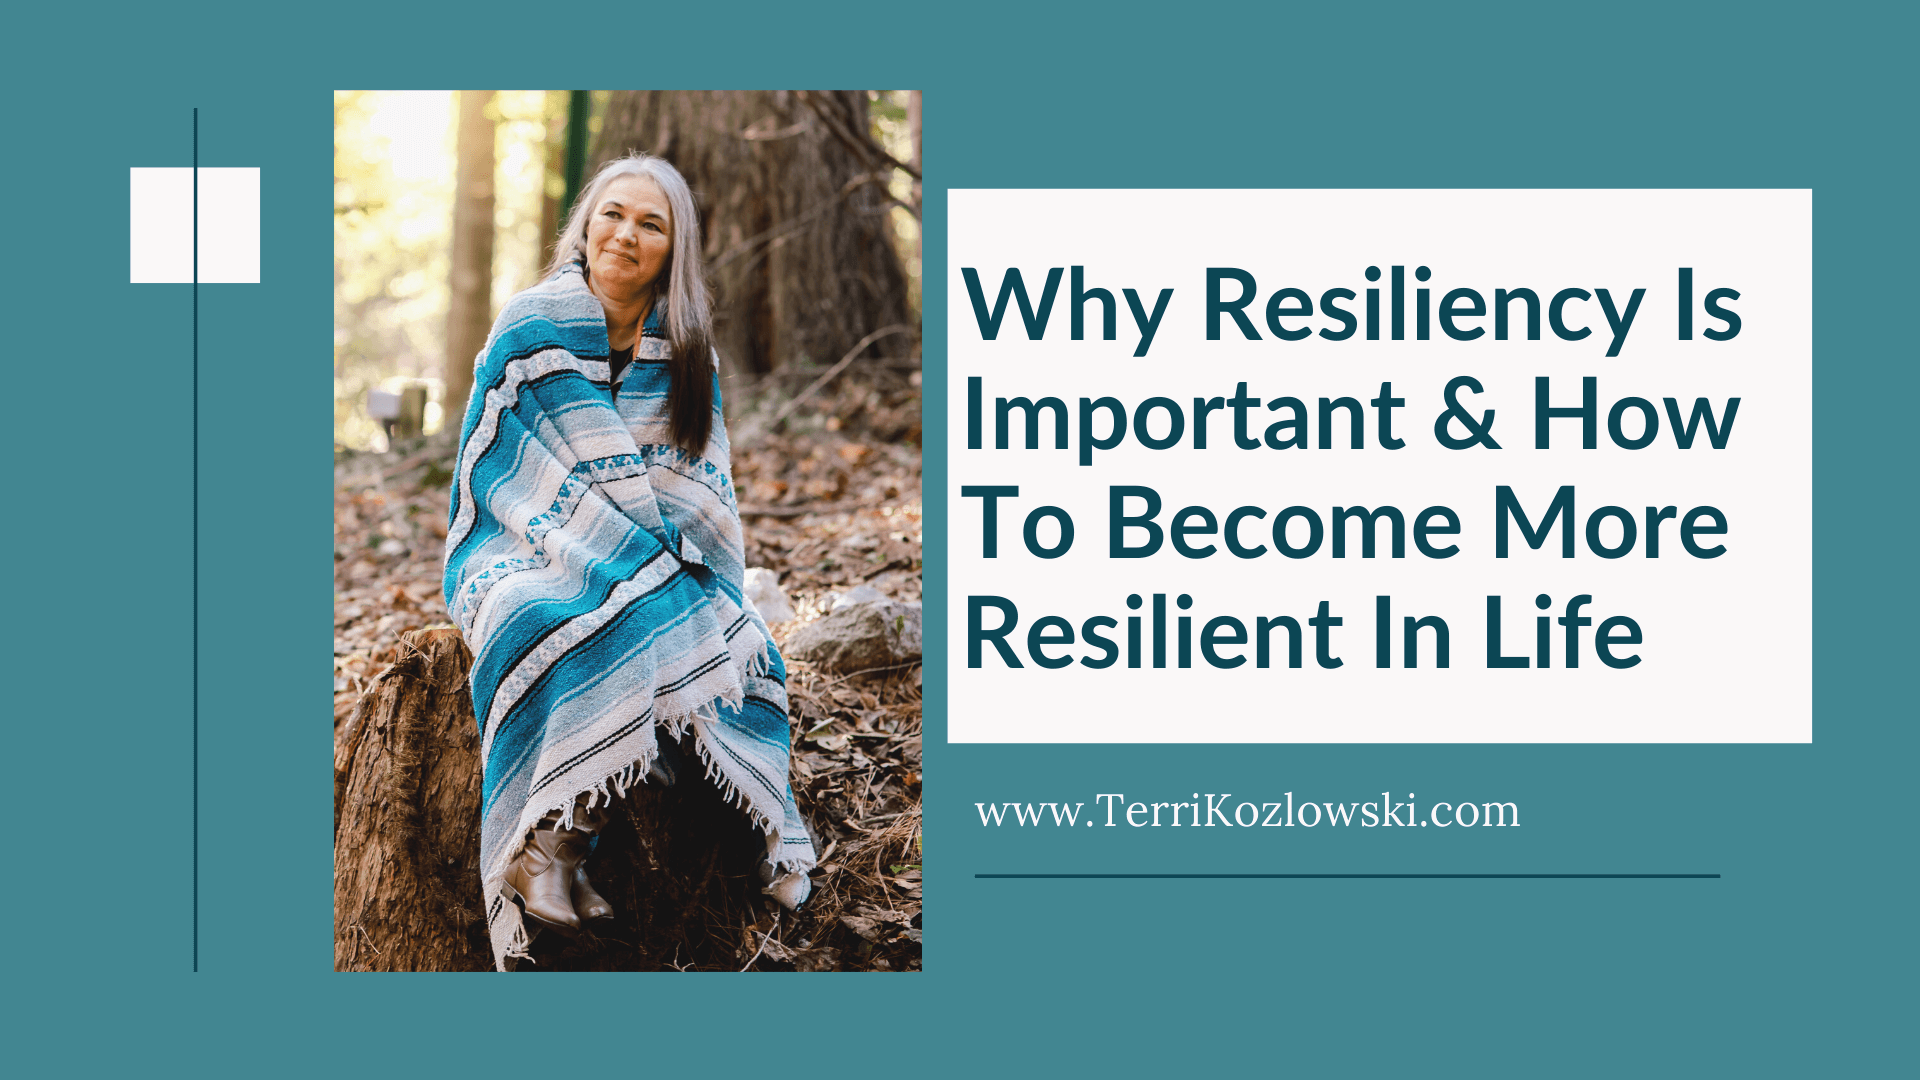 Why Resiliency Is Important & How To Become More Resilient In Life